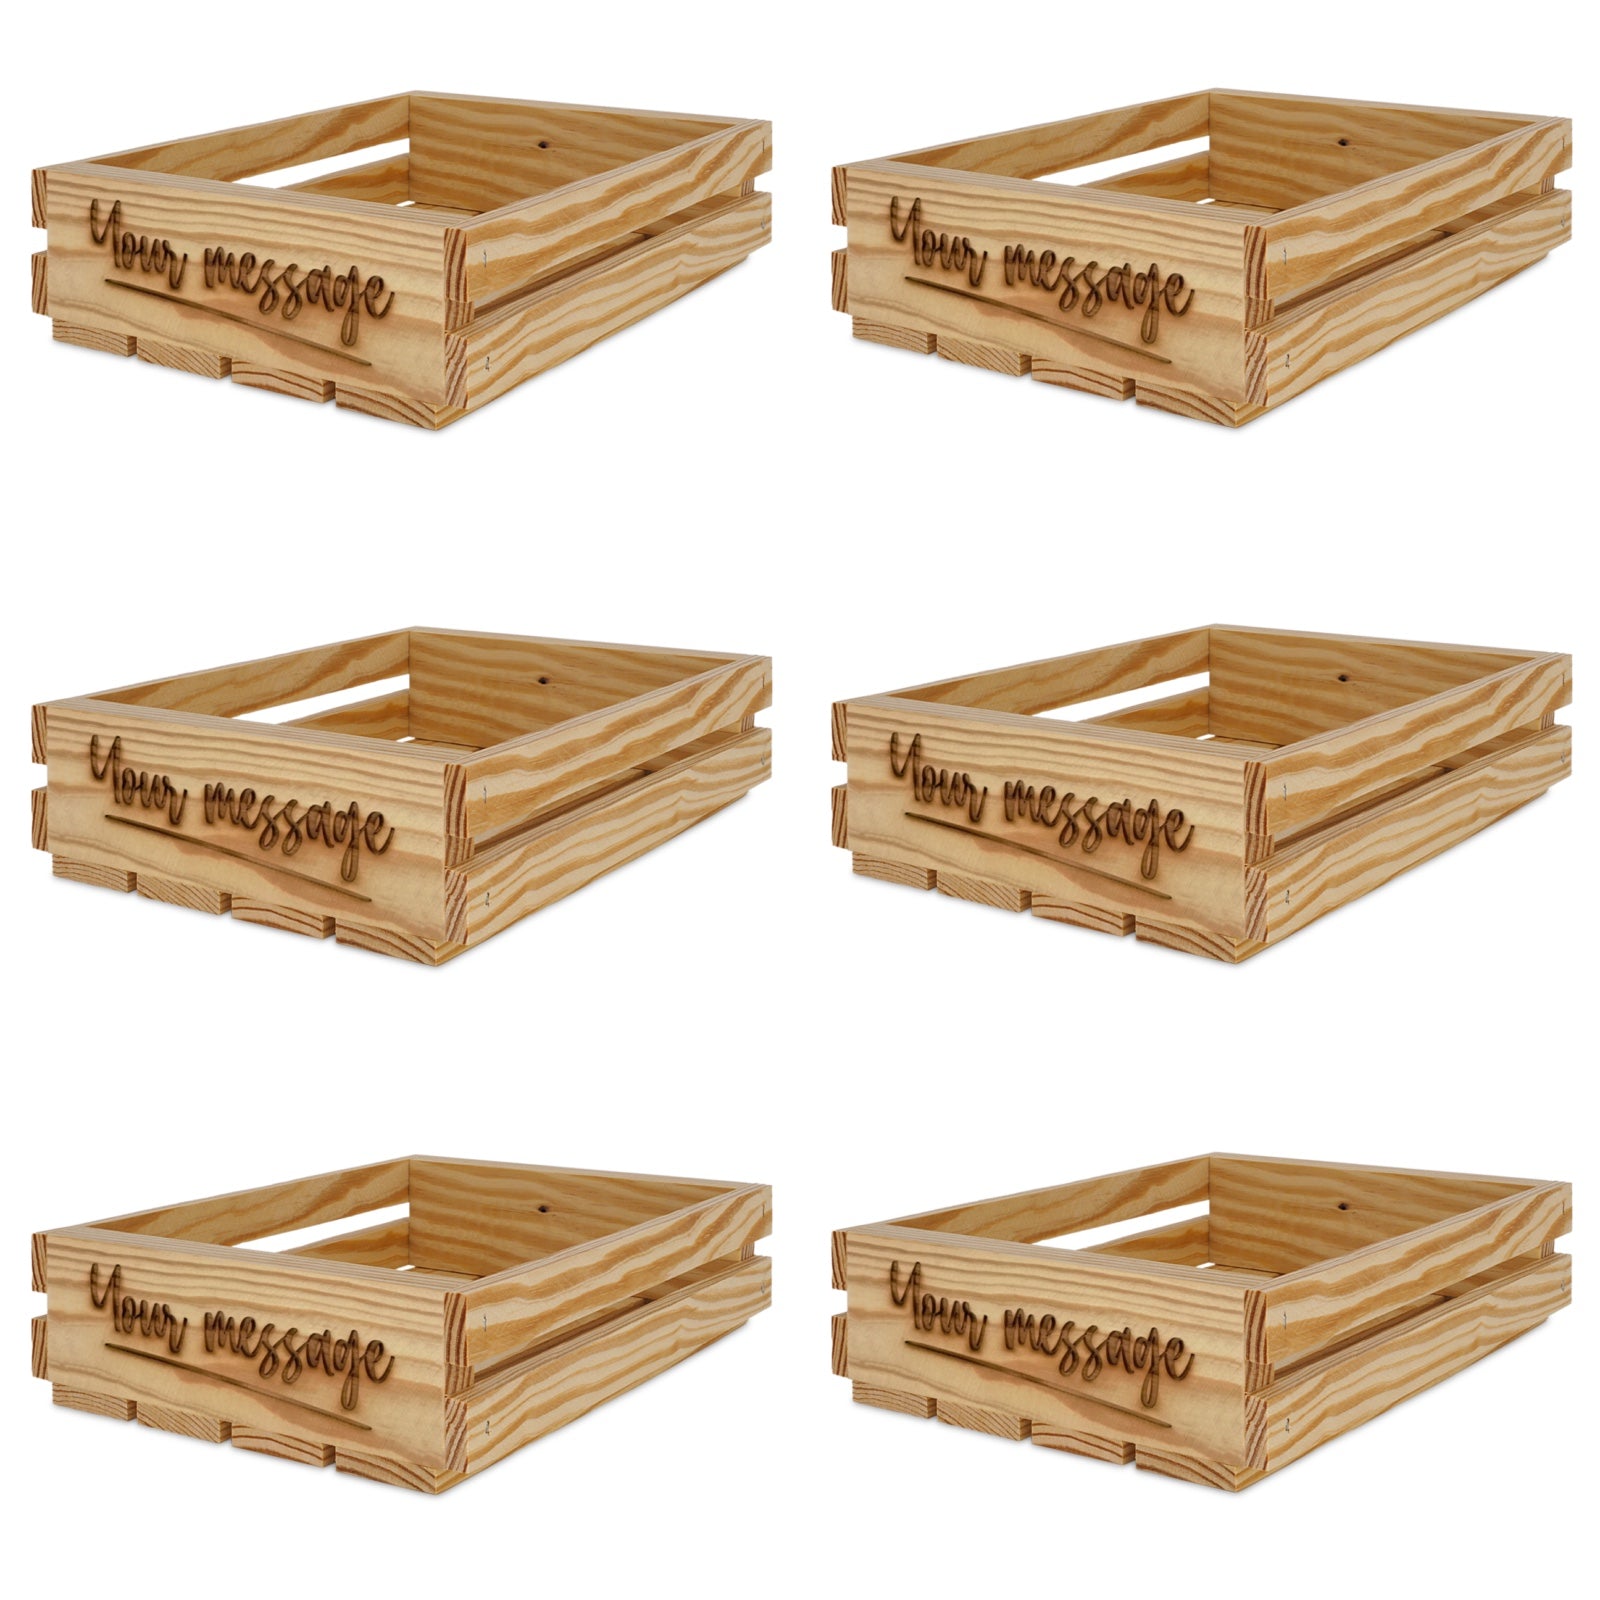 6 Small wooden crates with your message 10x8x2.5